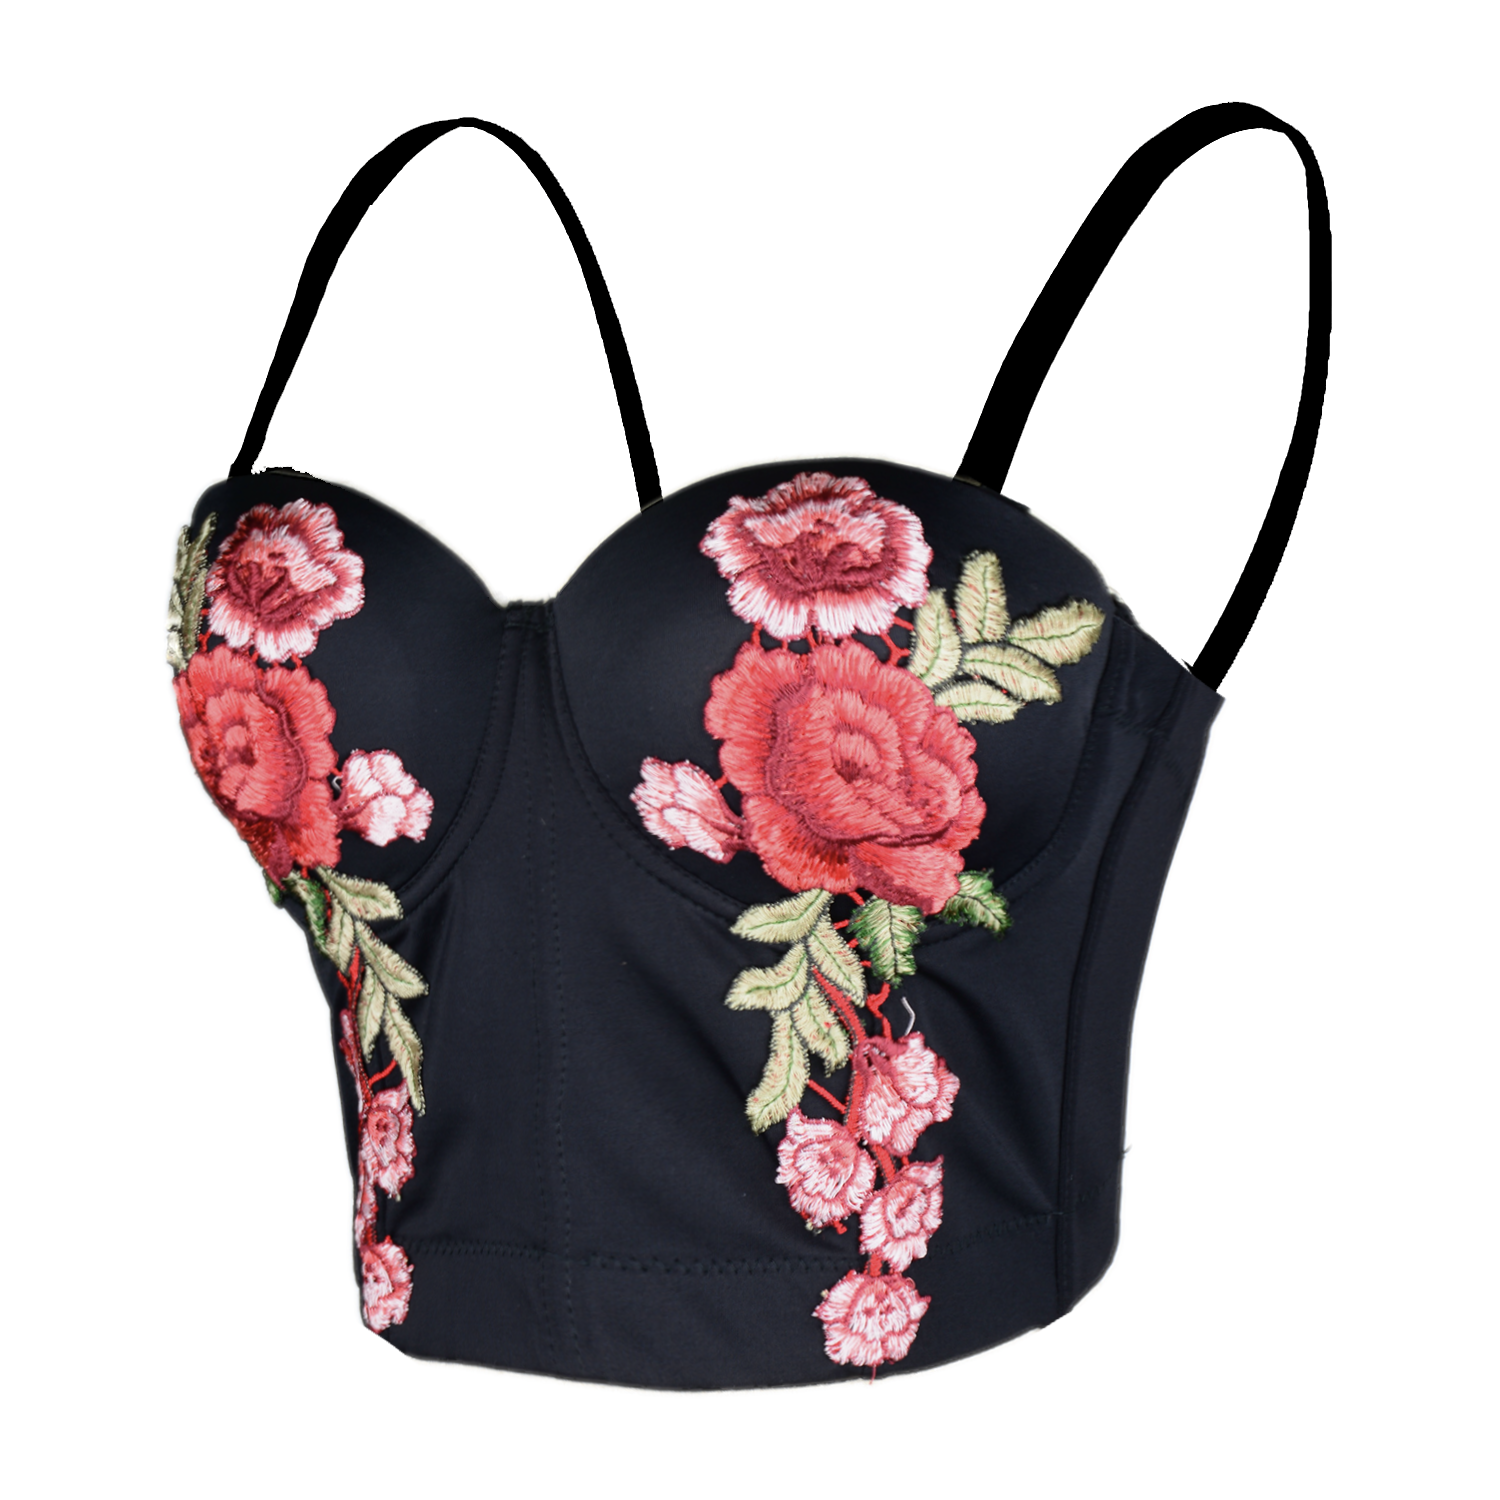 ELLACCI Women's Embroidery Floral Sexy Bustier Top Smooth Corset Bra ...